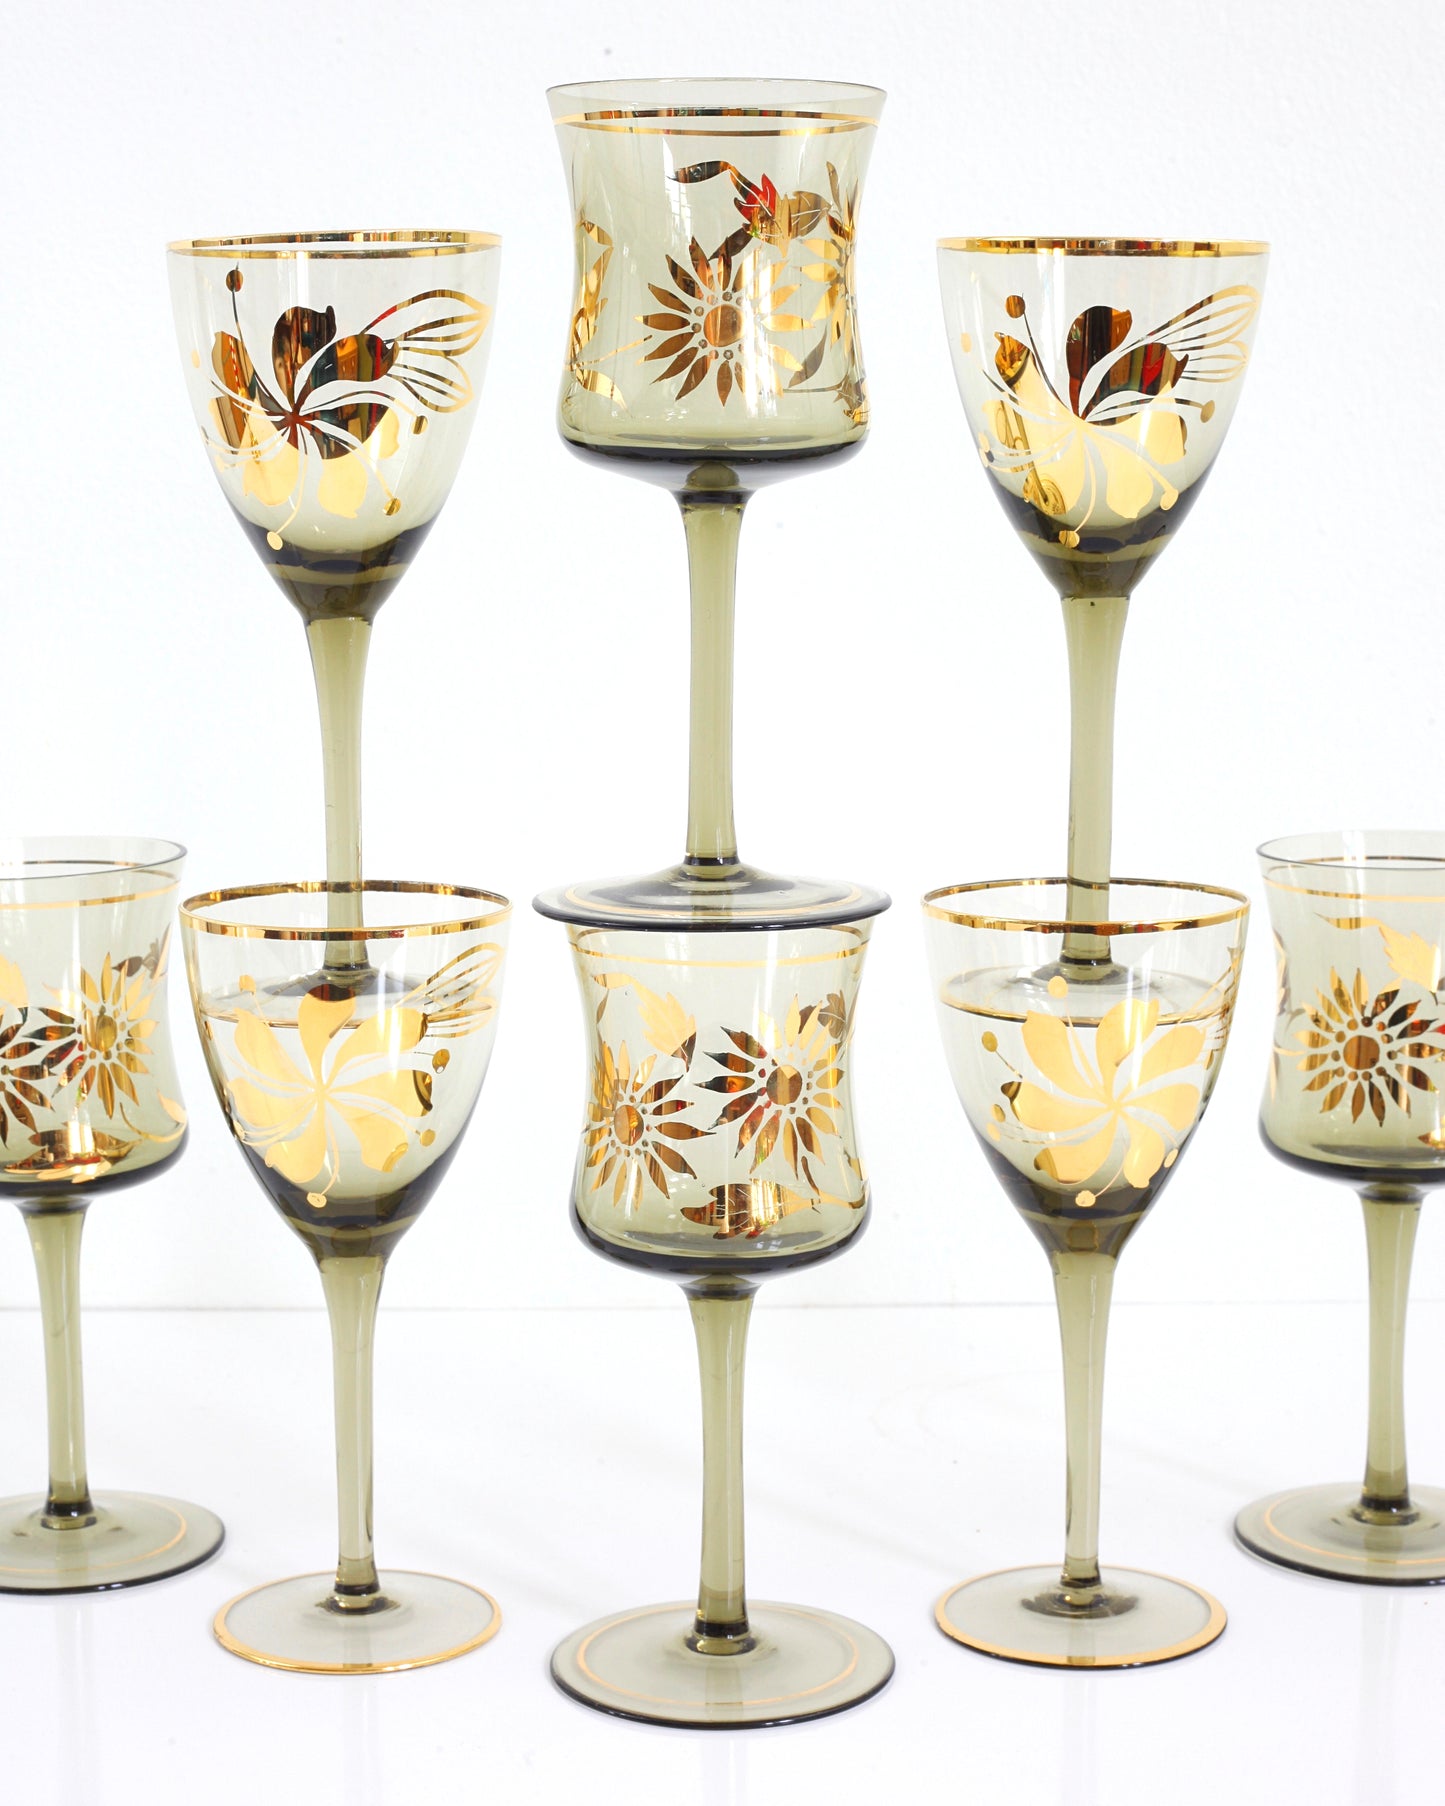 SOLD - Vintage Smoky Amber & Gold Romanian Sunflower Wine Glasses